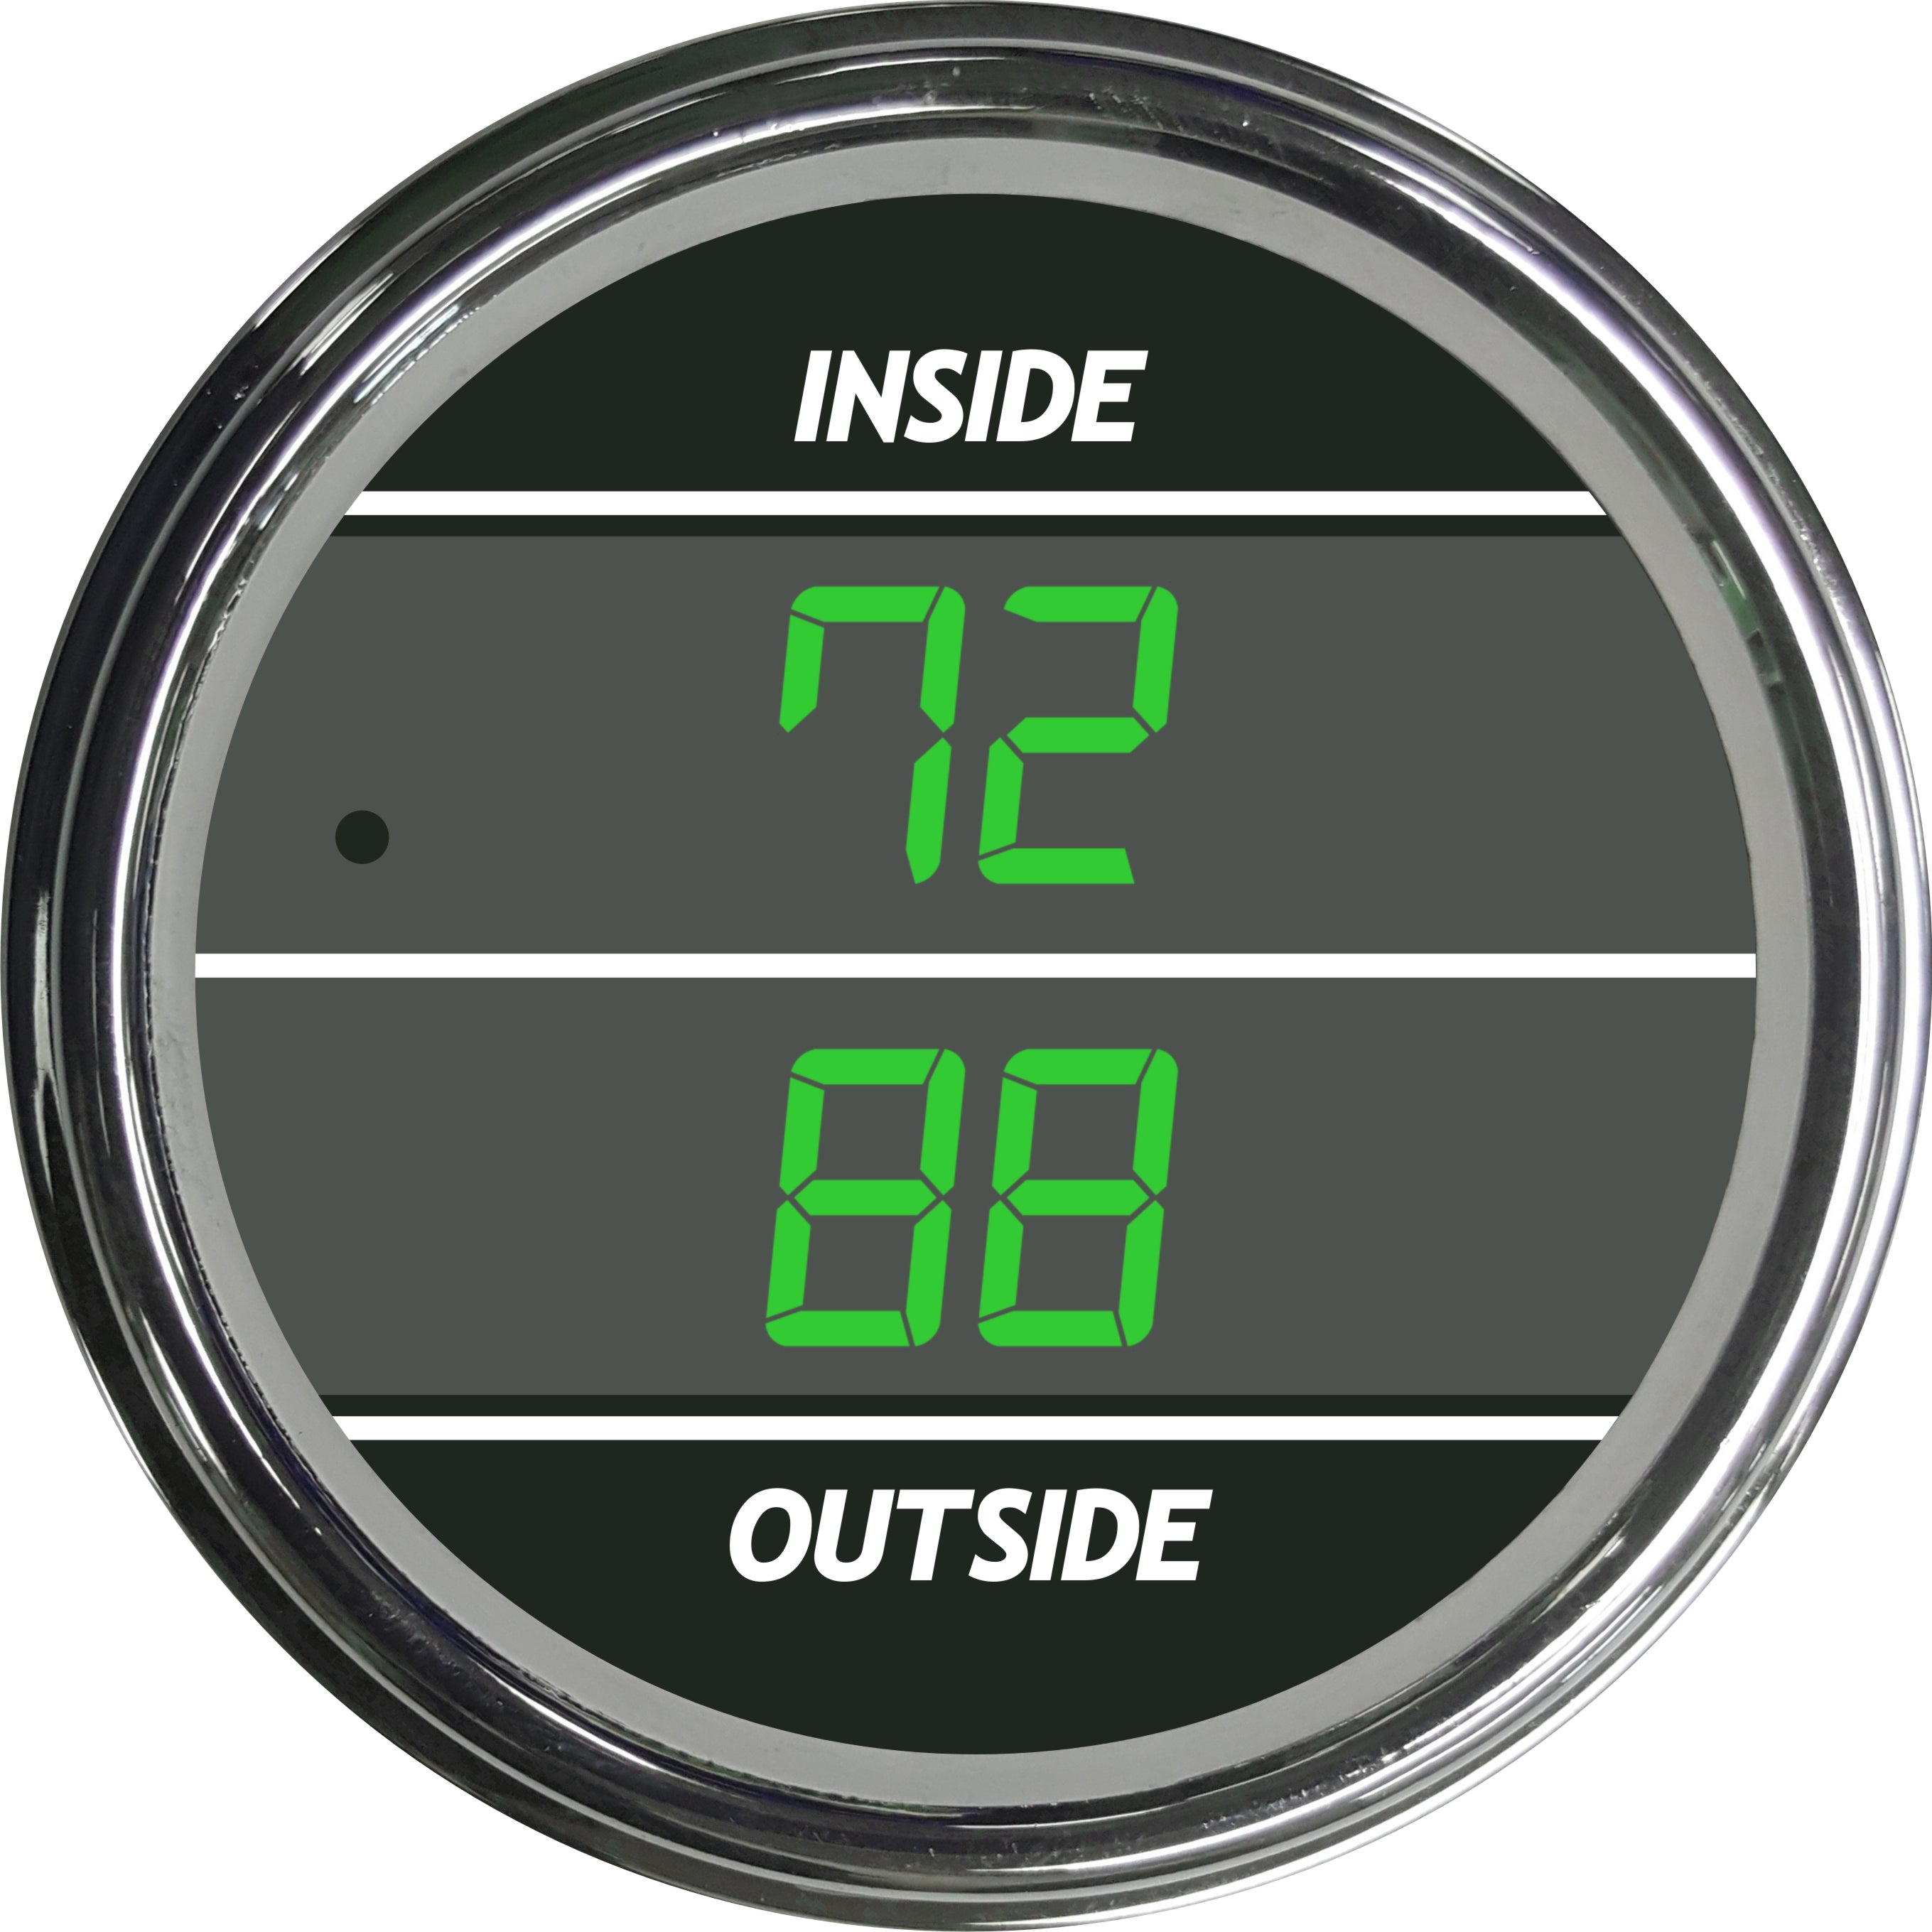 Recommendations for a digital outside temperature gauge